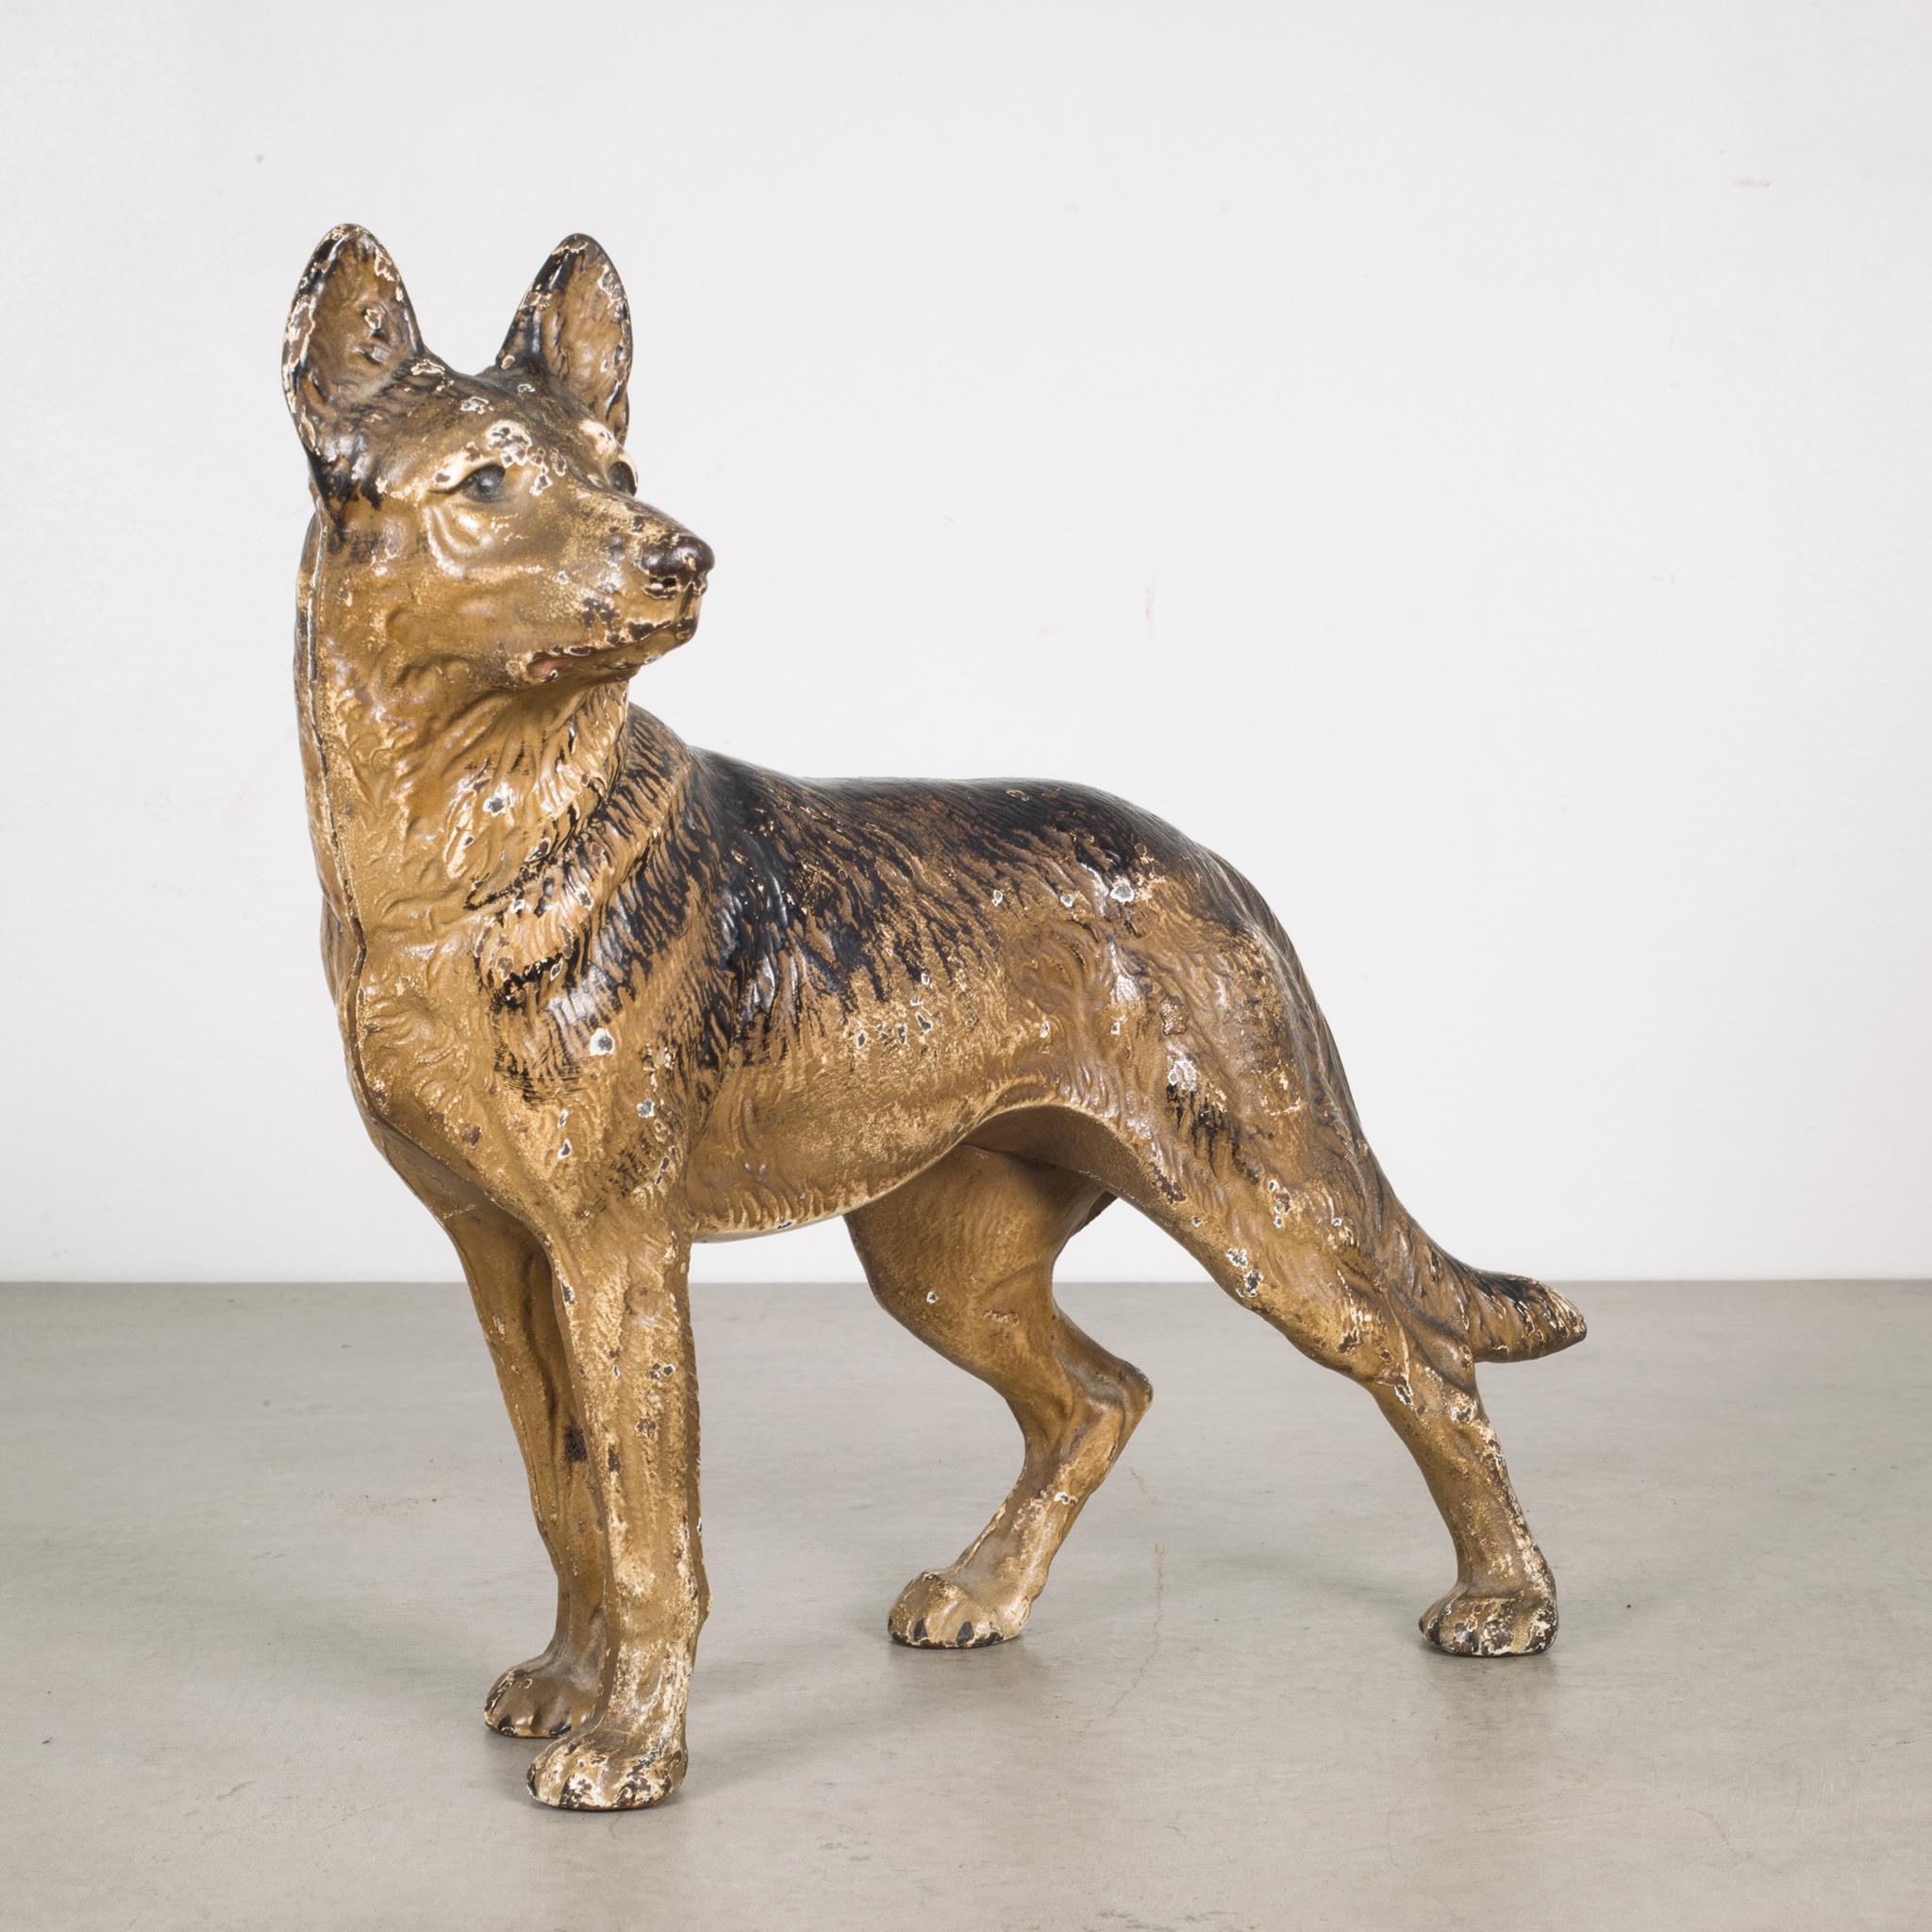 About

This is an original cast iron German Shepard doorstop manufactured by the Hubley Manufacturing Company in Lancaster Pennsylvania USA. The piece has retained its original hand painted finish which shows wear along the spine, both screws and